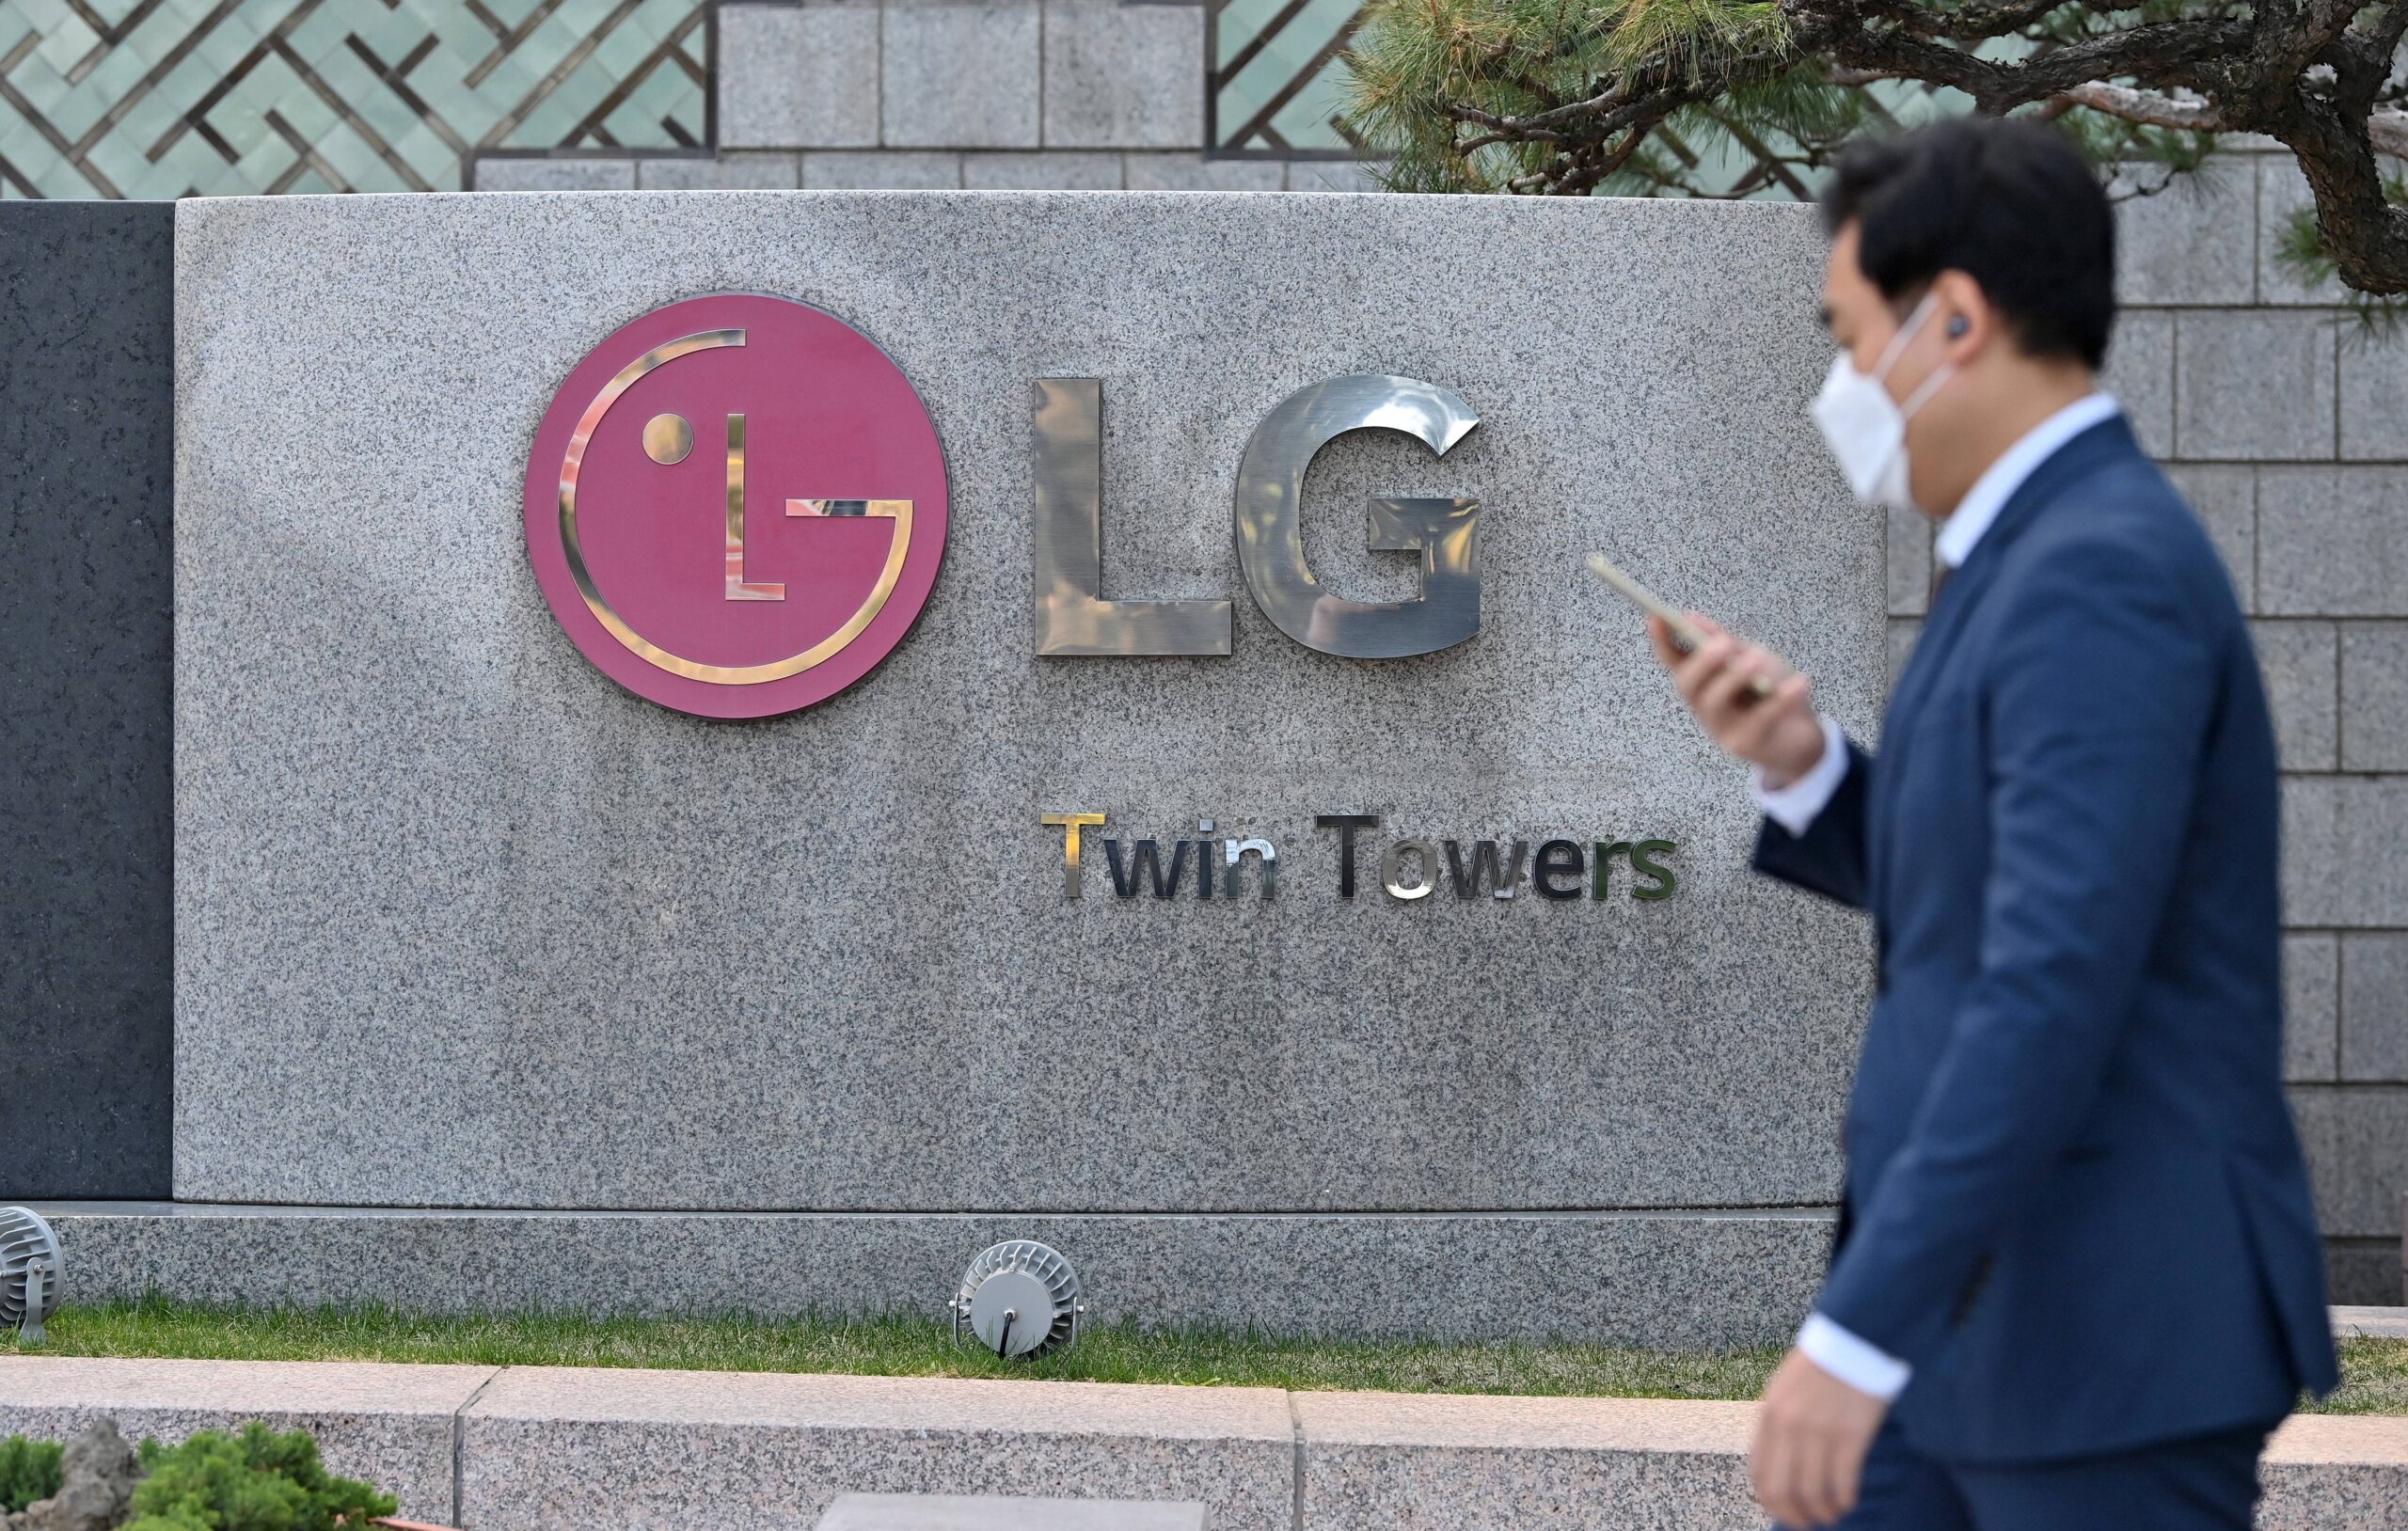 LG appoints unusual CEO to manual its beleaguered electronics division